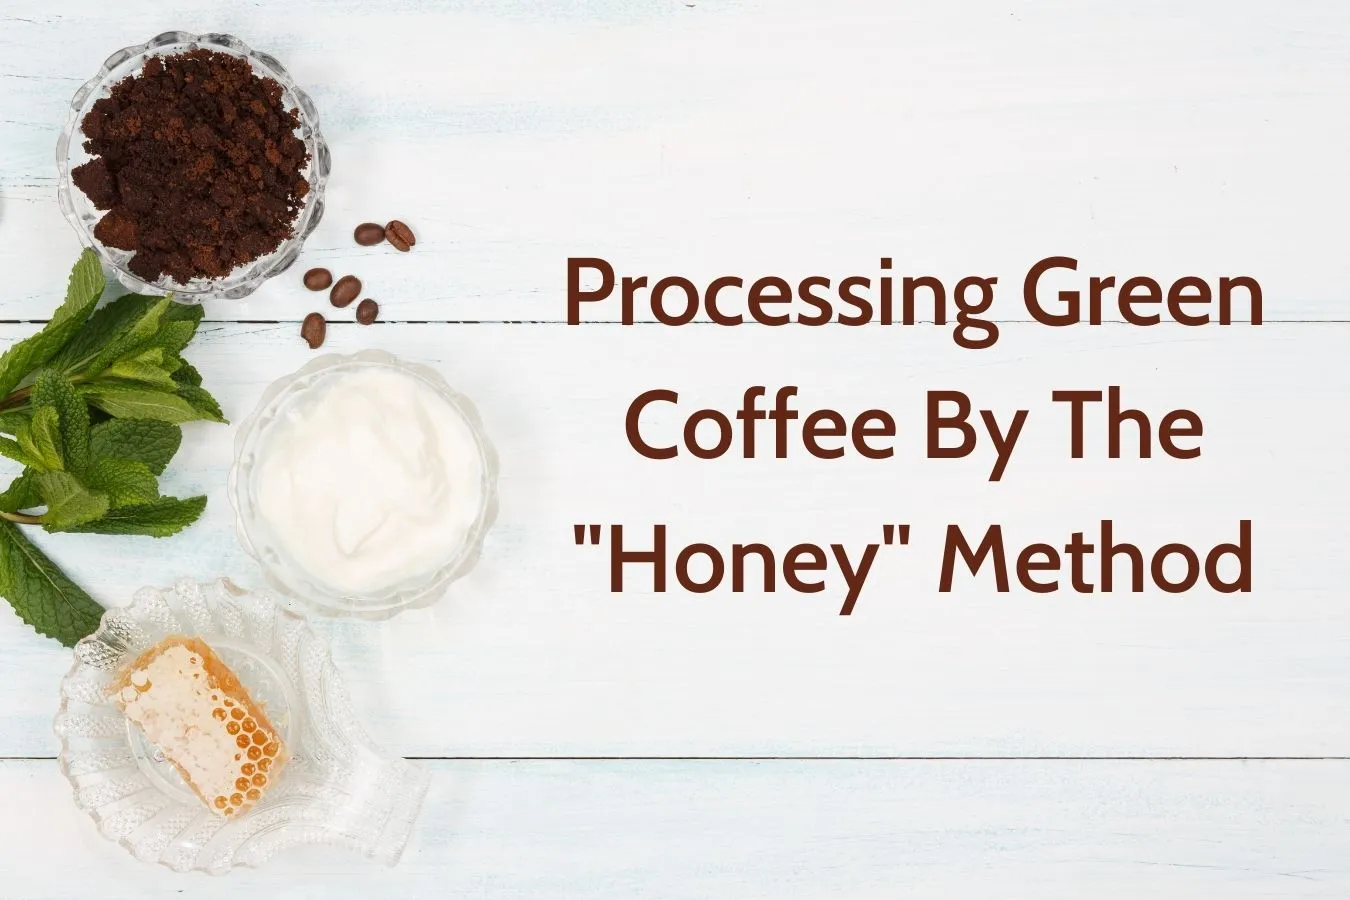 Processing Green Coffee By The Honey Method